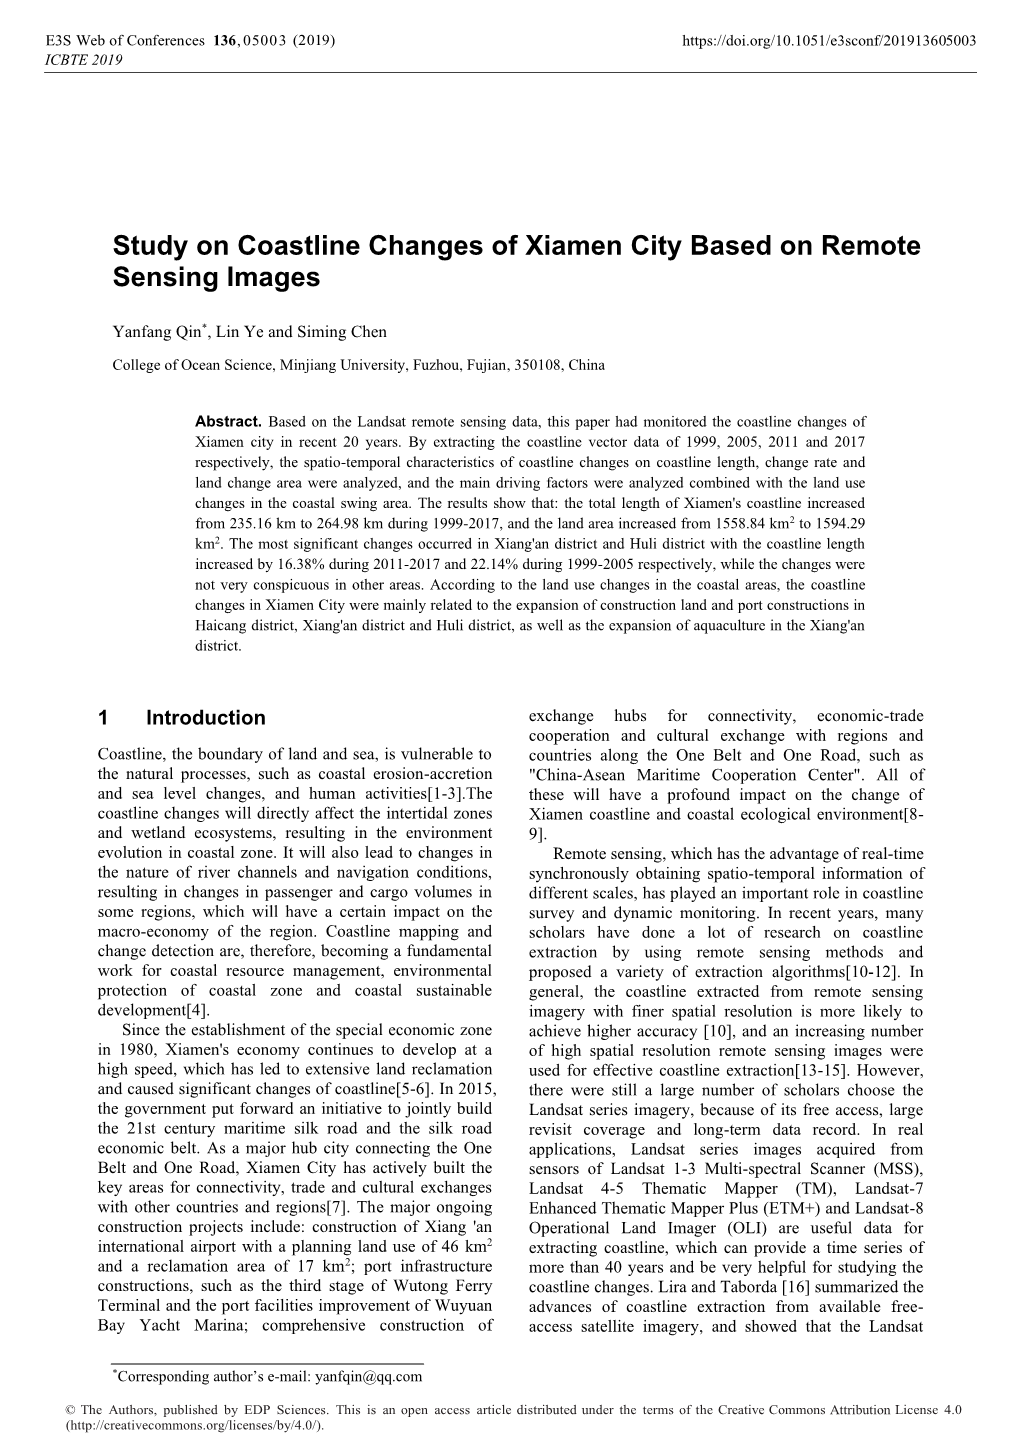 Study on Coastline Changes of Xiamen City Based on Remote Sensing Images